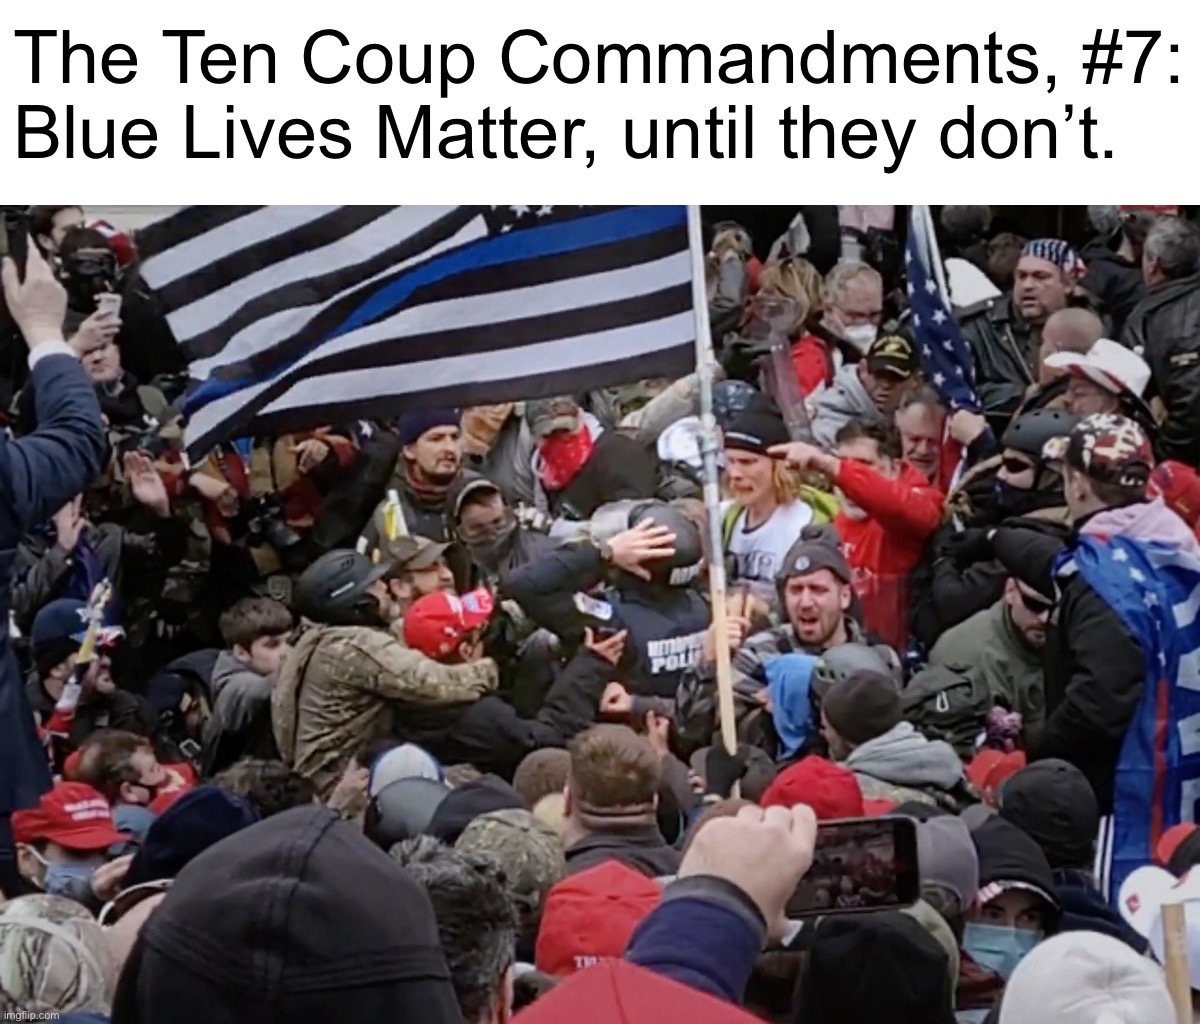 Don’t let a little thing like ideological coherence stop you. Cop in the way? Beat him with a Thin Blue Line flag! |  The Ten Coup Commandments, #7: Blue Lives Matter, until they don’t. | image tagged in jan 6 blue lives matter hypocrites,jan 6,ten coup commandments,coup,conservative hypocrisy,blue lives matter | made w/ Imgflip meme maker